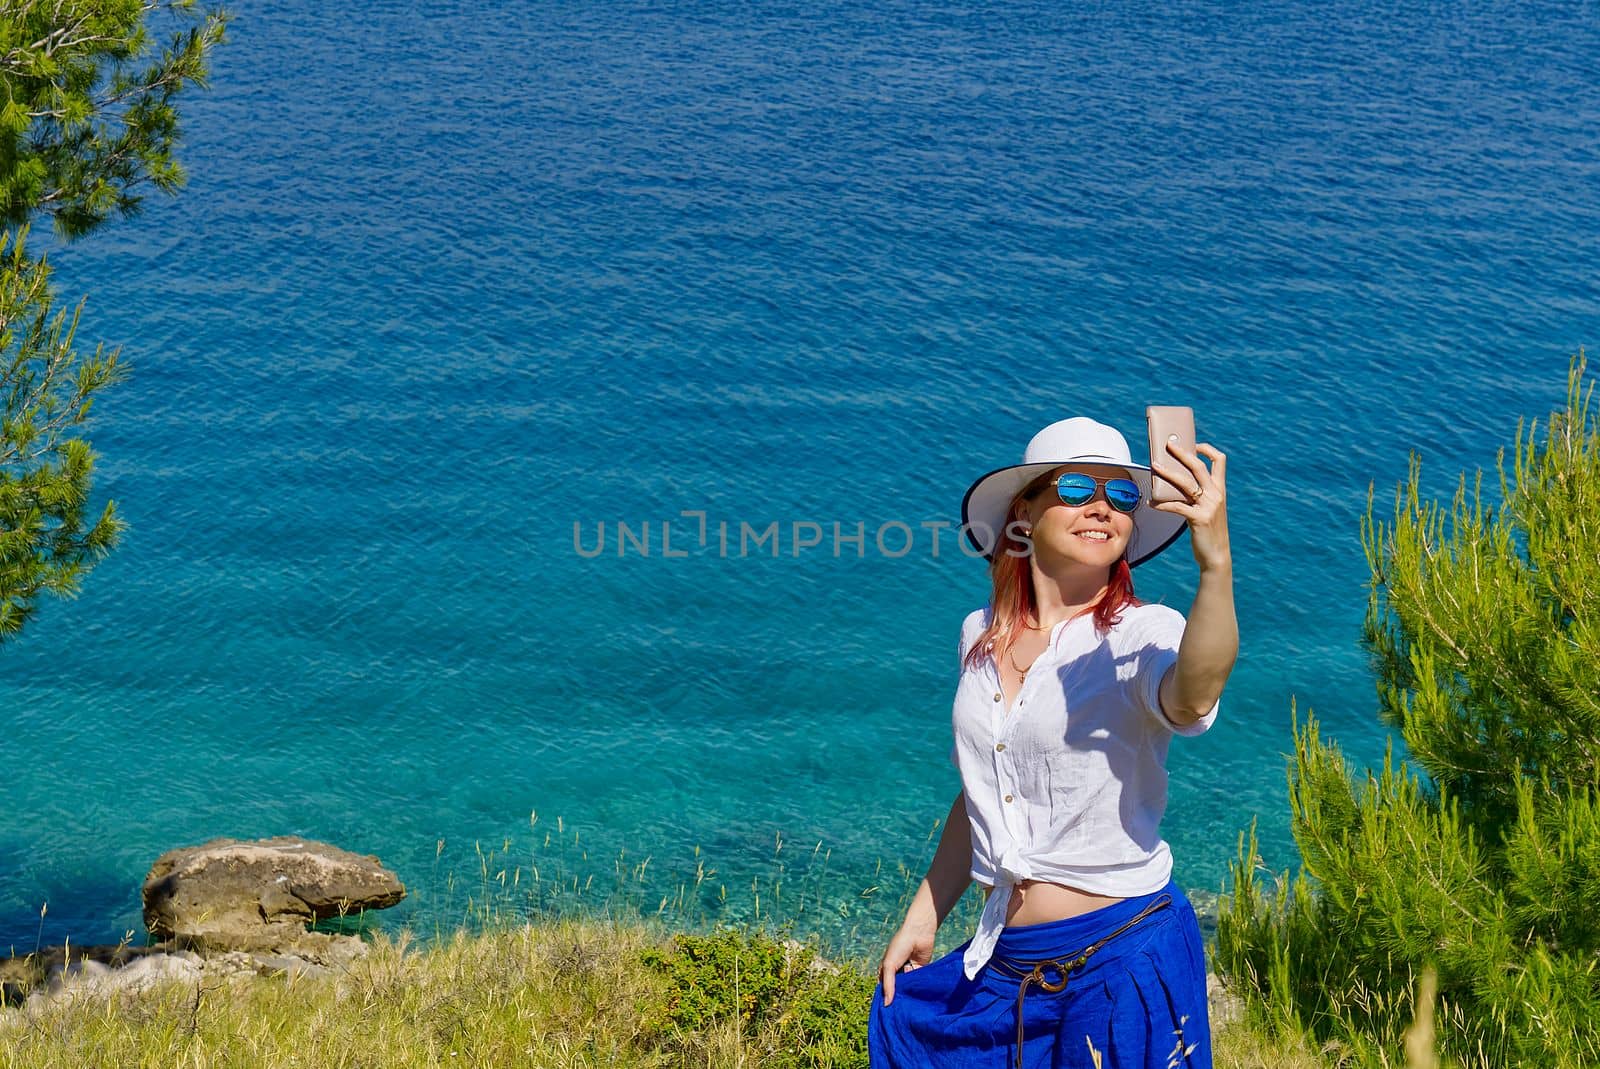 Smiling young woman in sunglasses and straw hat taking selfie against sea and blue sky.